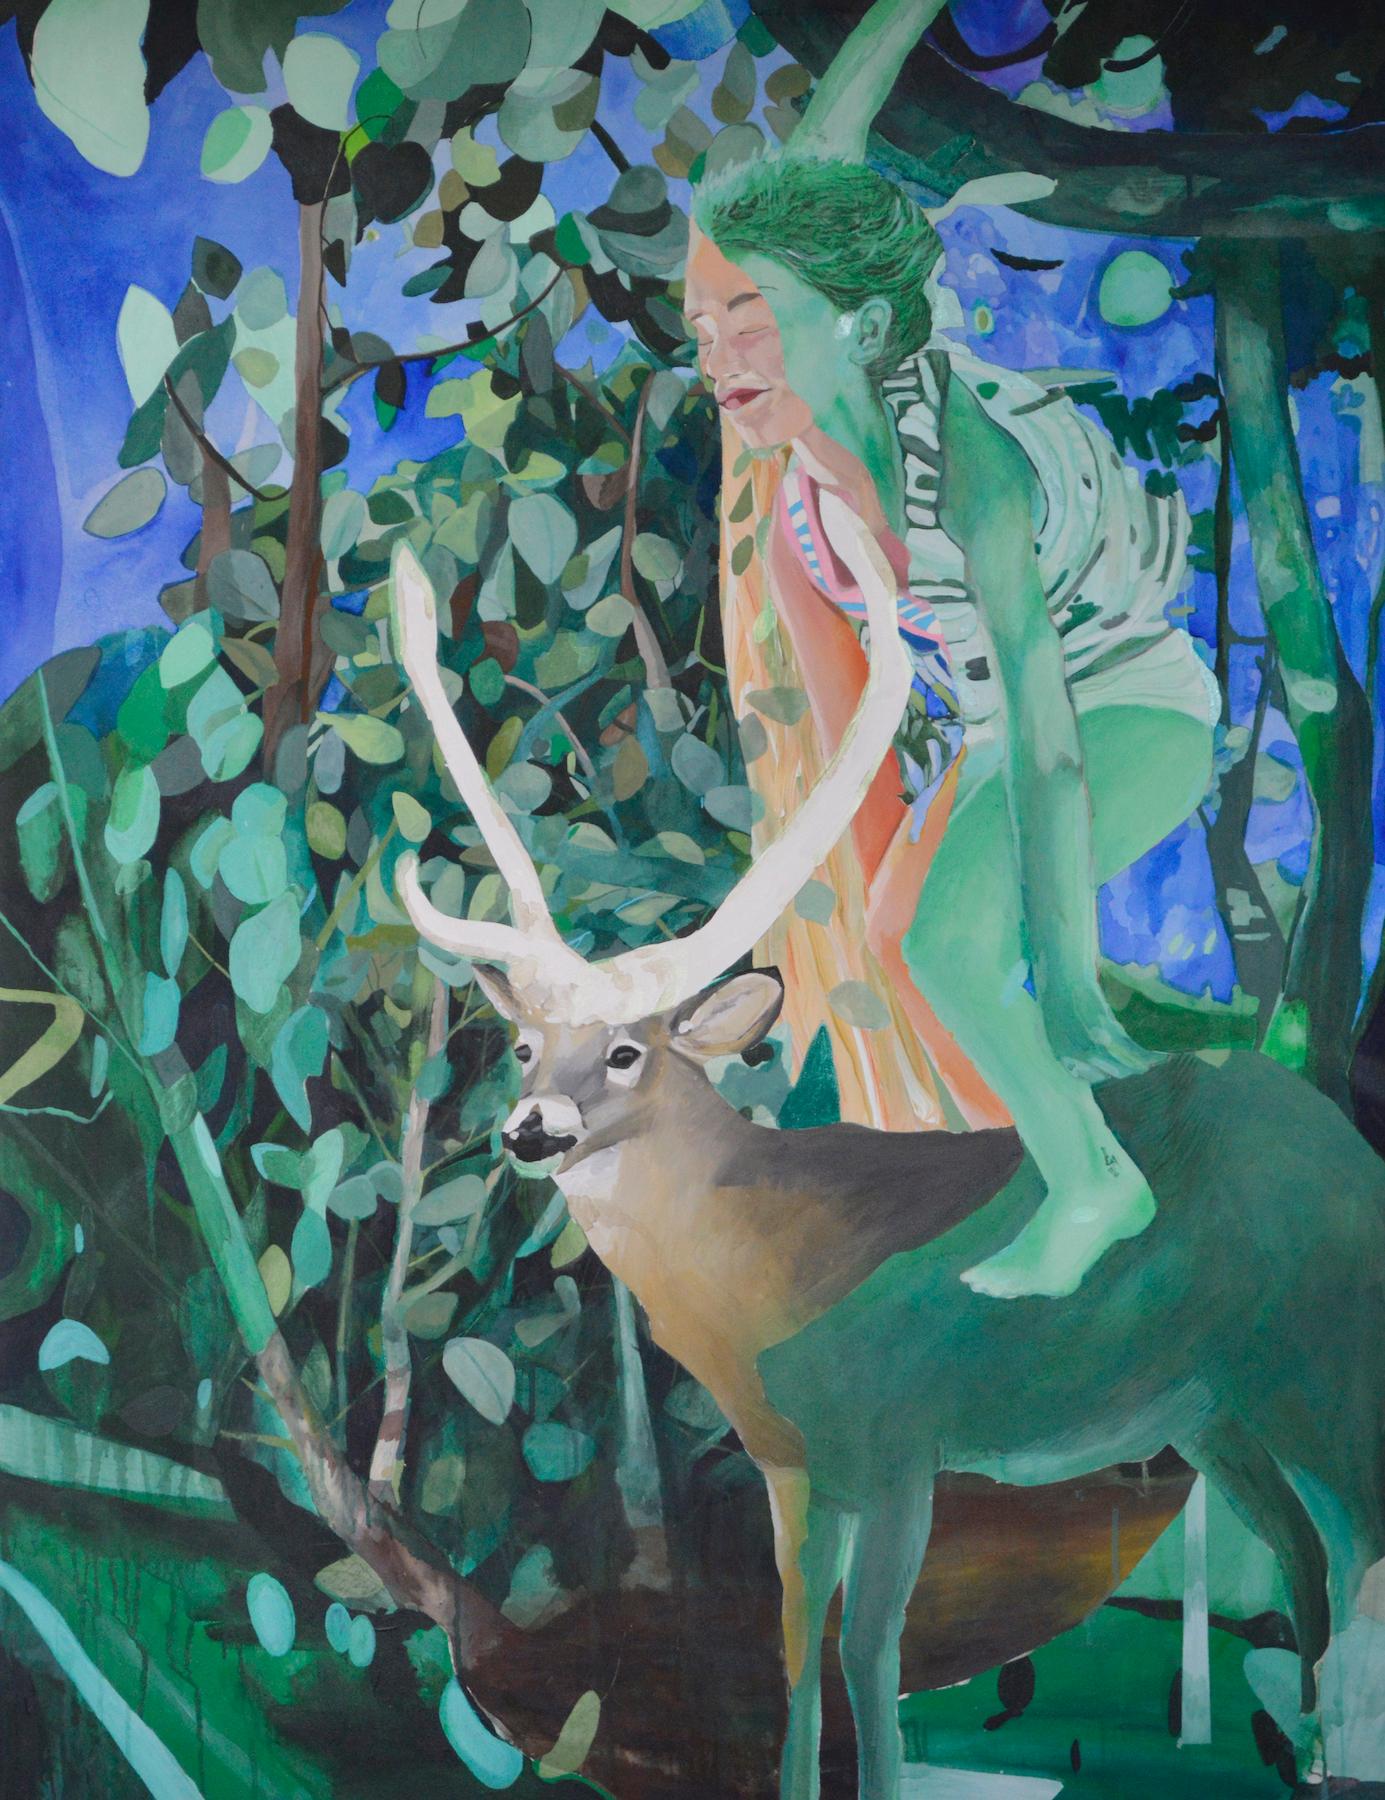 JENNY DAY earned an MFA in Painting and Drawing from the University of Arizona, a BFA in Painting from the University of Alaska Fairbanks and a BA in Environmental Studies from the University of California Santa Cruz. Her exhibition record most